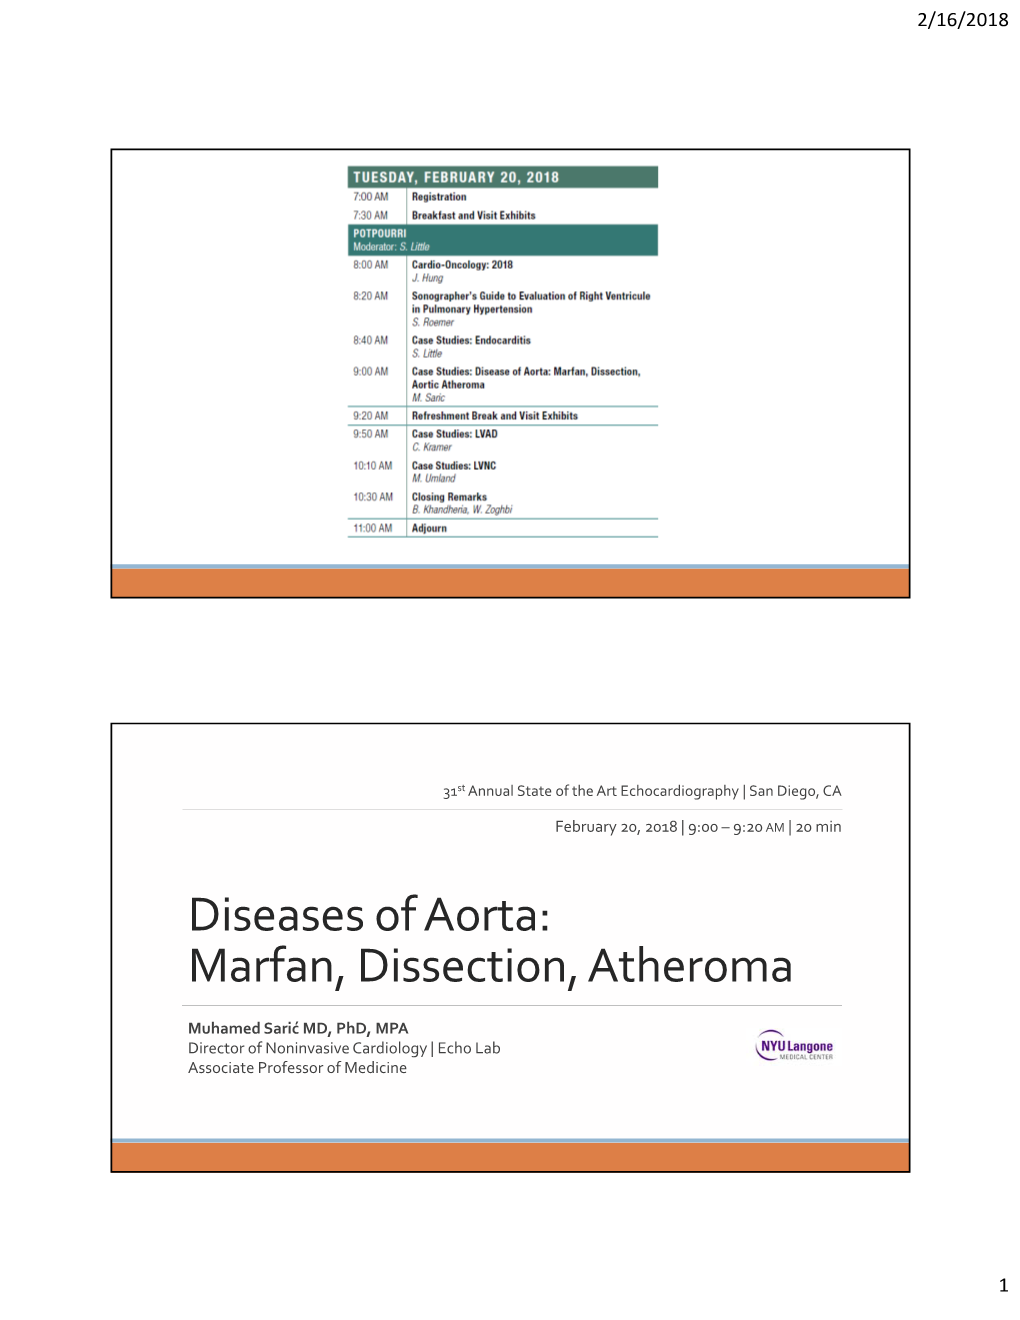 Diseases of Aorta: Marfan, Dissection, Atheroma